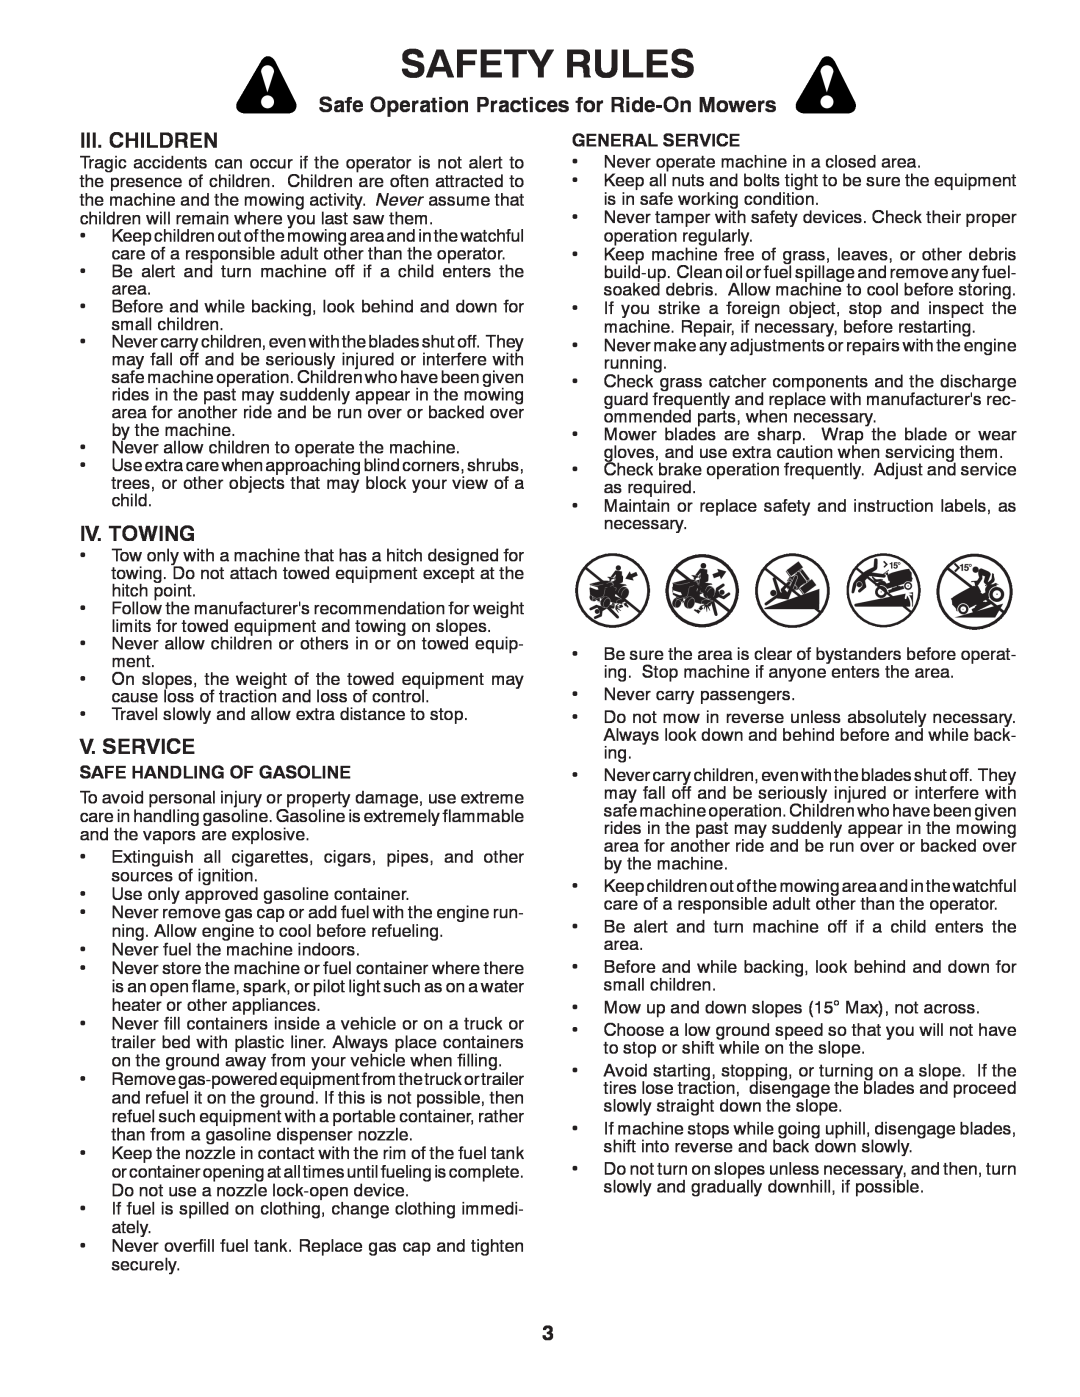 Poulan 419764 manual Iii. Children, Iv. Towing, V. Service, Safety Rules, Safe Operation Practices for Ride-On Mowers 